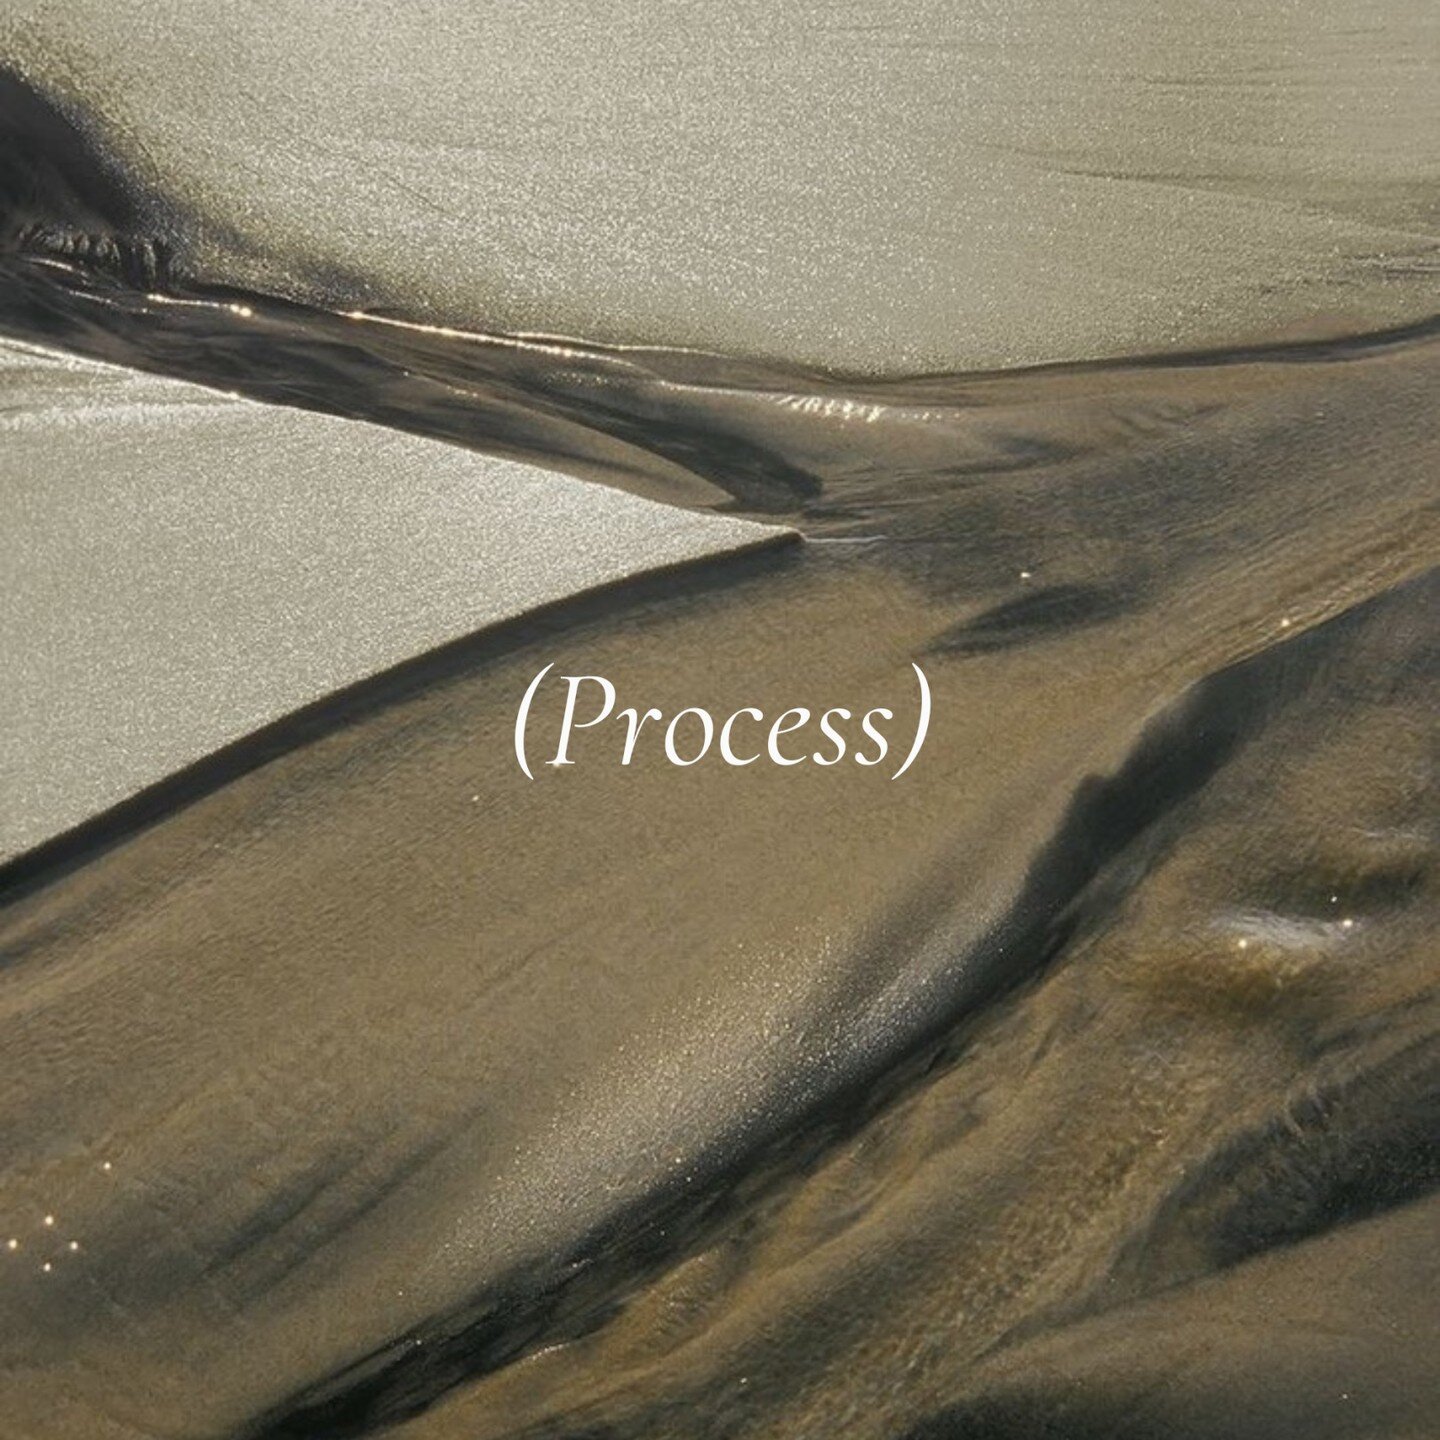 PILLAR || PROCESS
At Simplicity Biome, we uphold a commitment to responsible practices in mineral extraction, farming, and agriculture. Our regenerative methods prioritize the health of both the land and its people, with minimal-impact harvesting tha